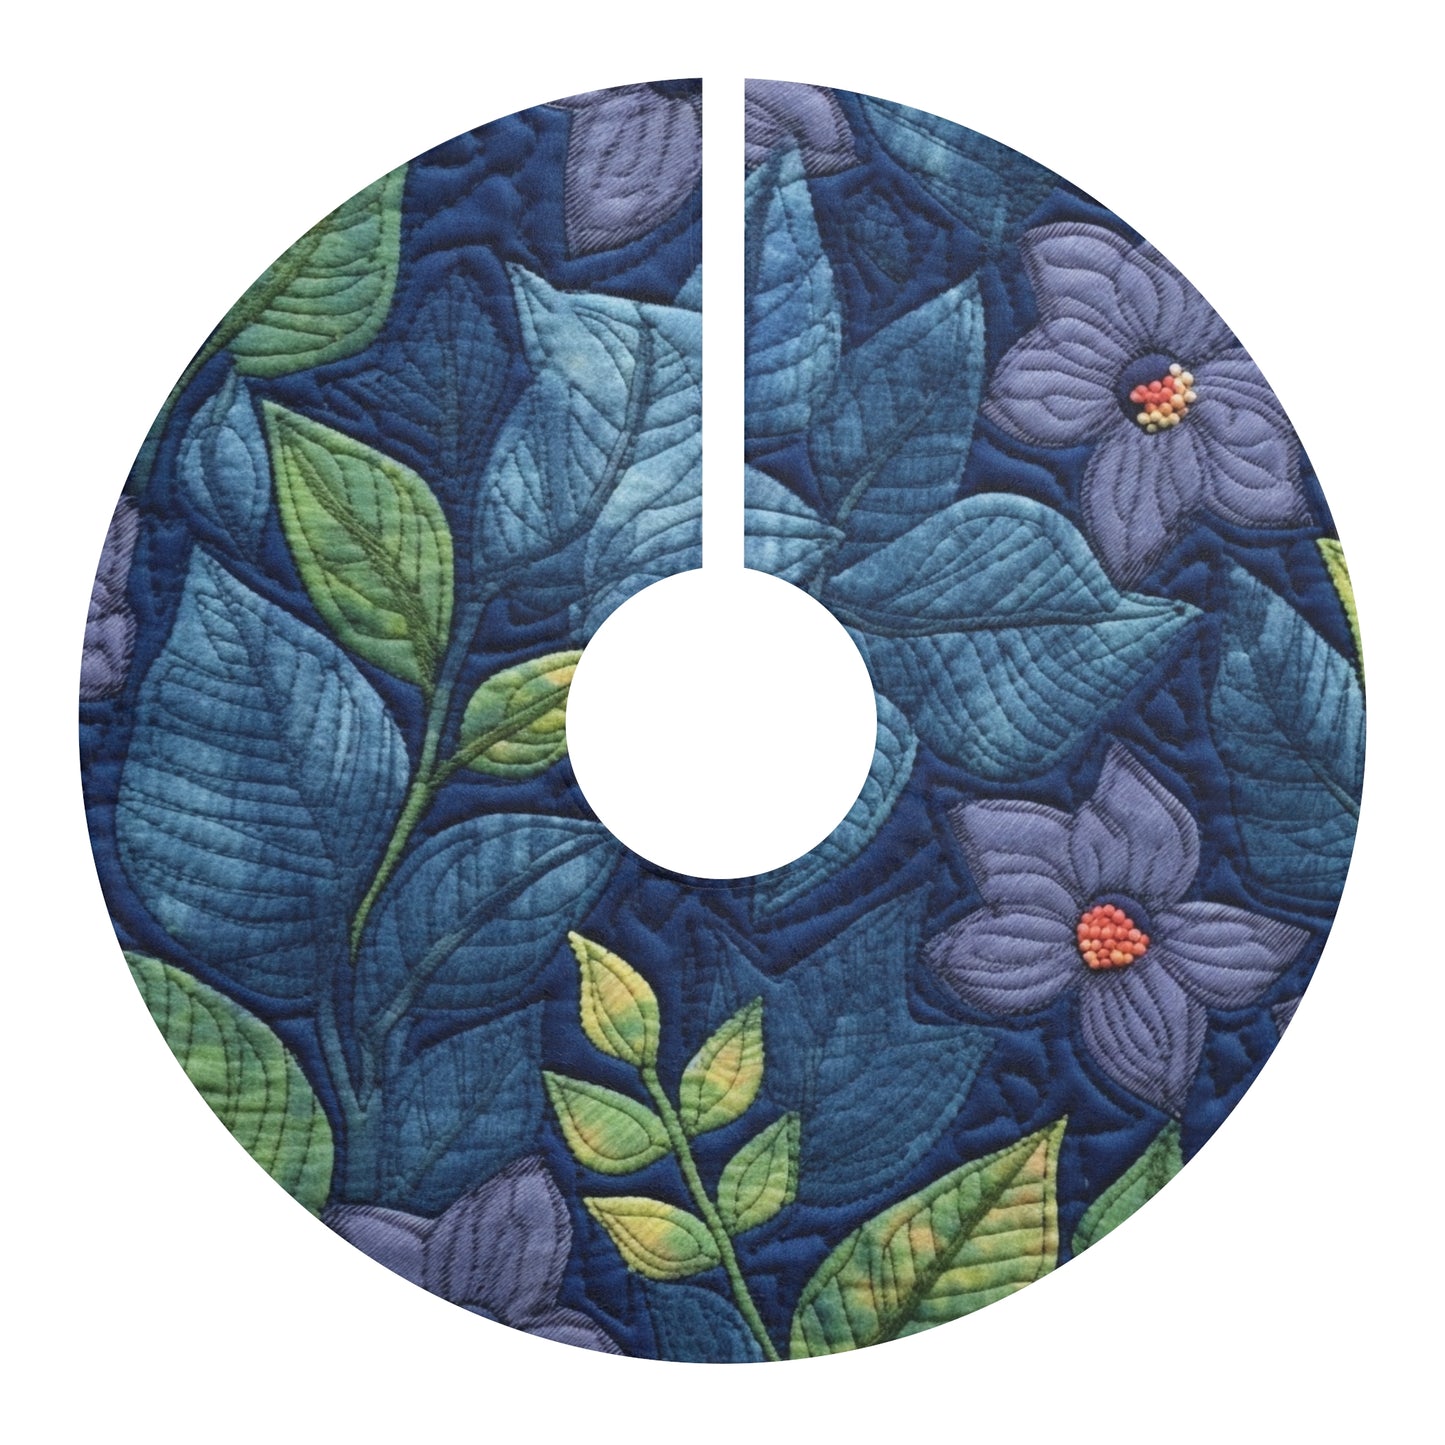 Floral Embroidery Blue: Denim-Inspired, Artisan-Crafted Flower Design - Christmas Tree Skirts